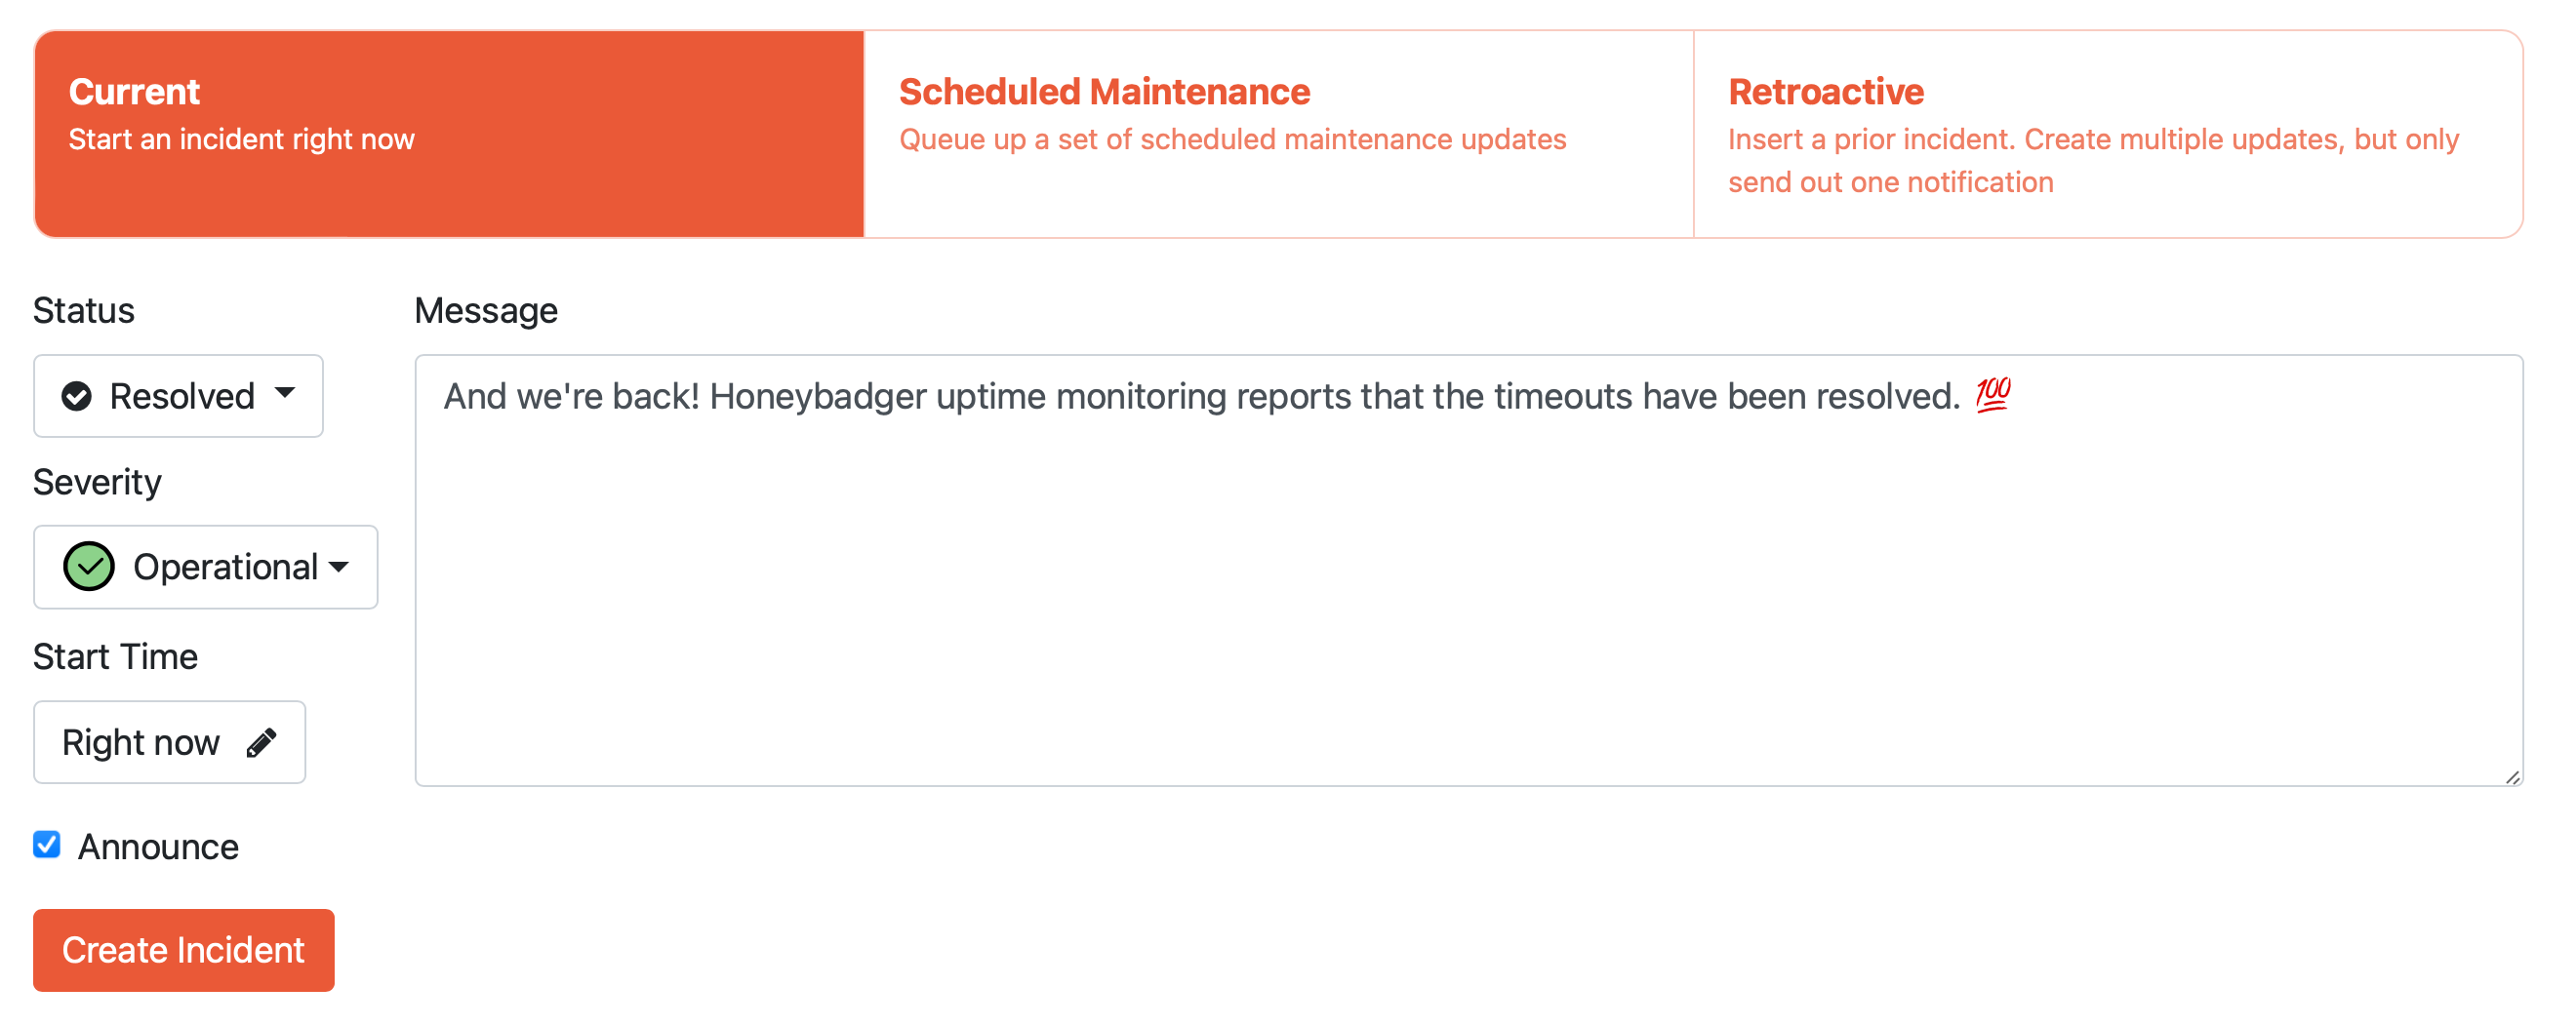 And we're back! Honeybadger uptime monitoring reports that the timeouts have been resolved.